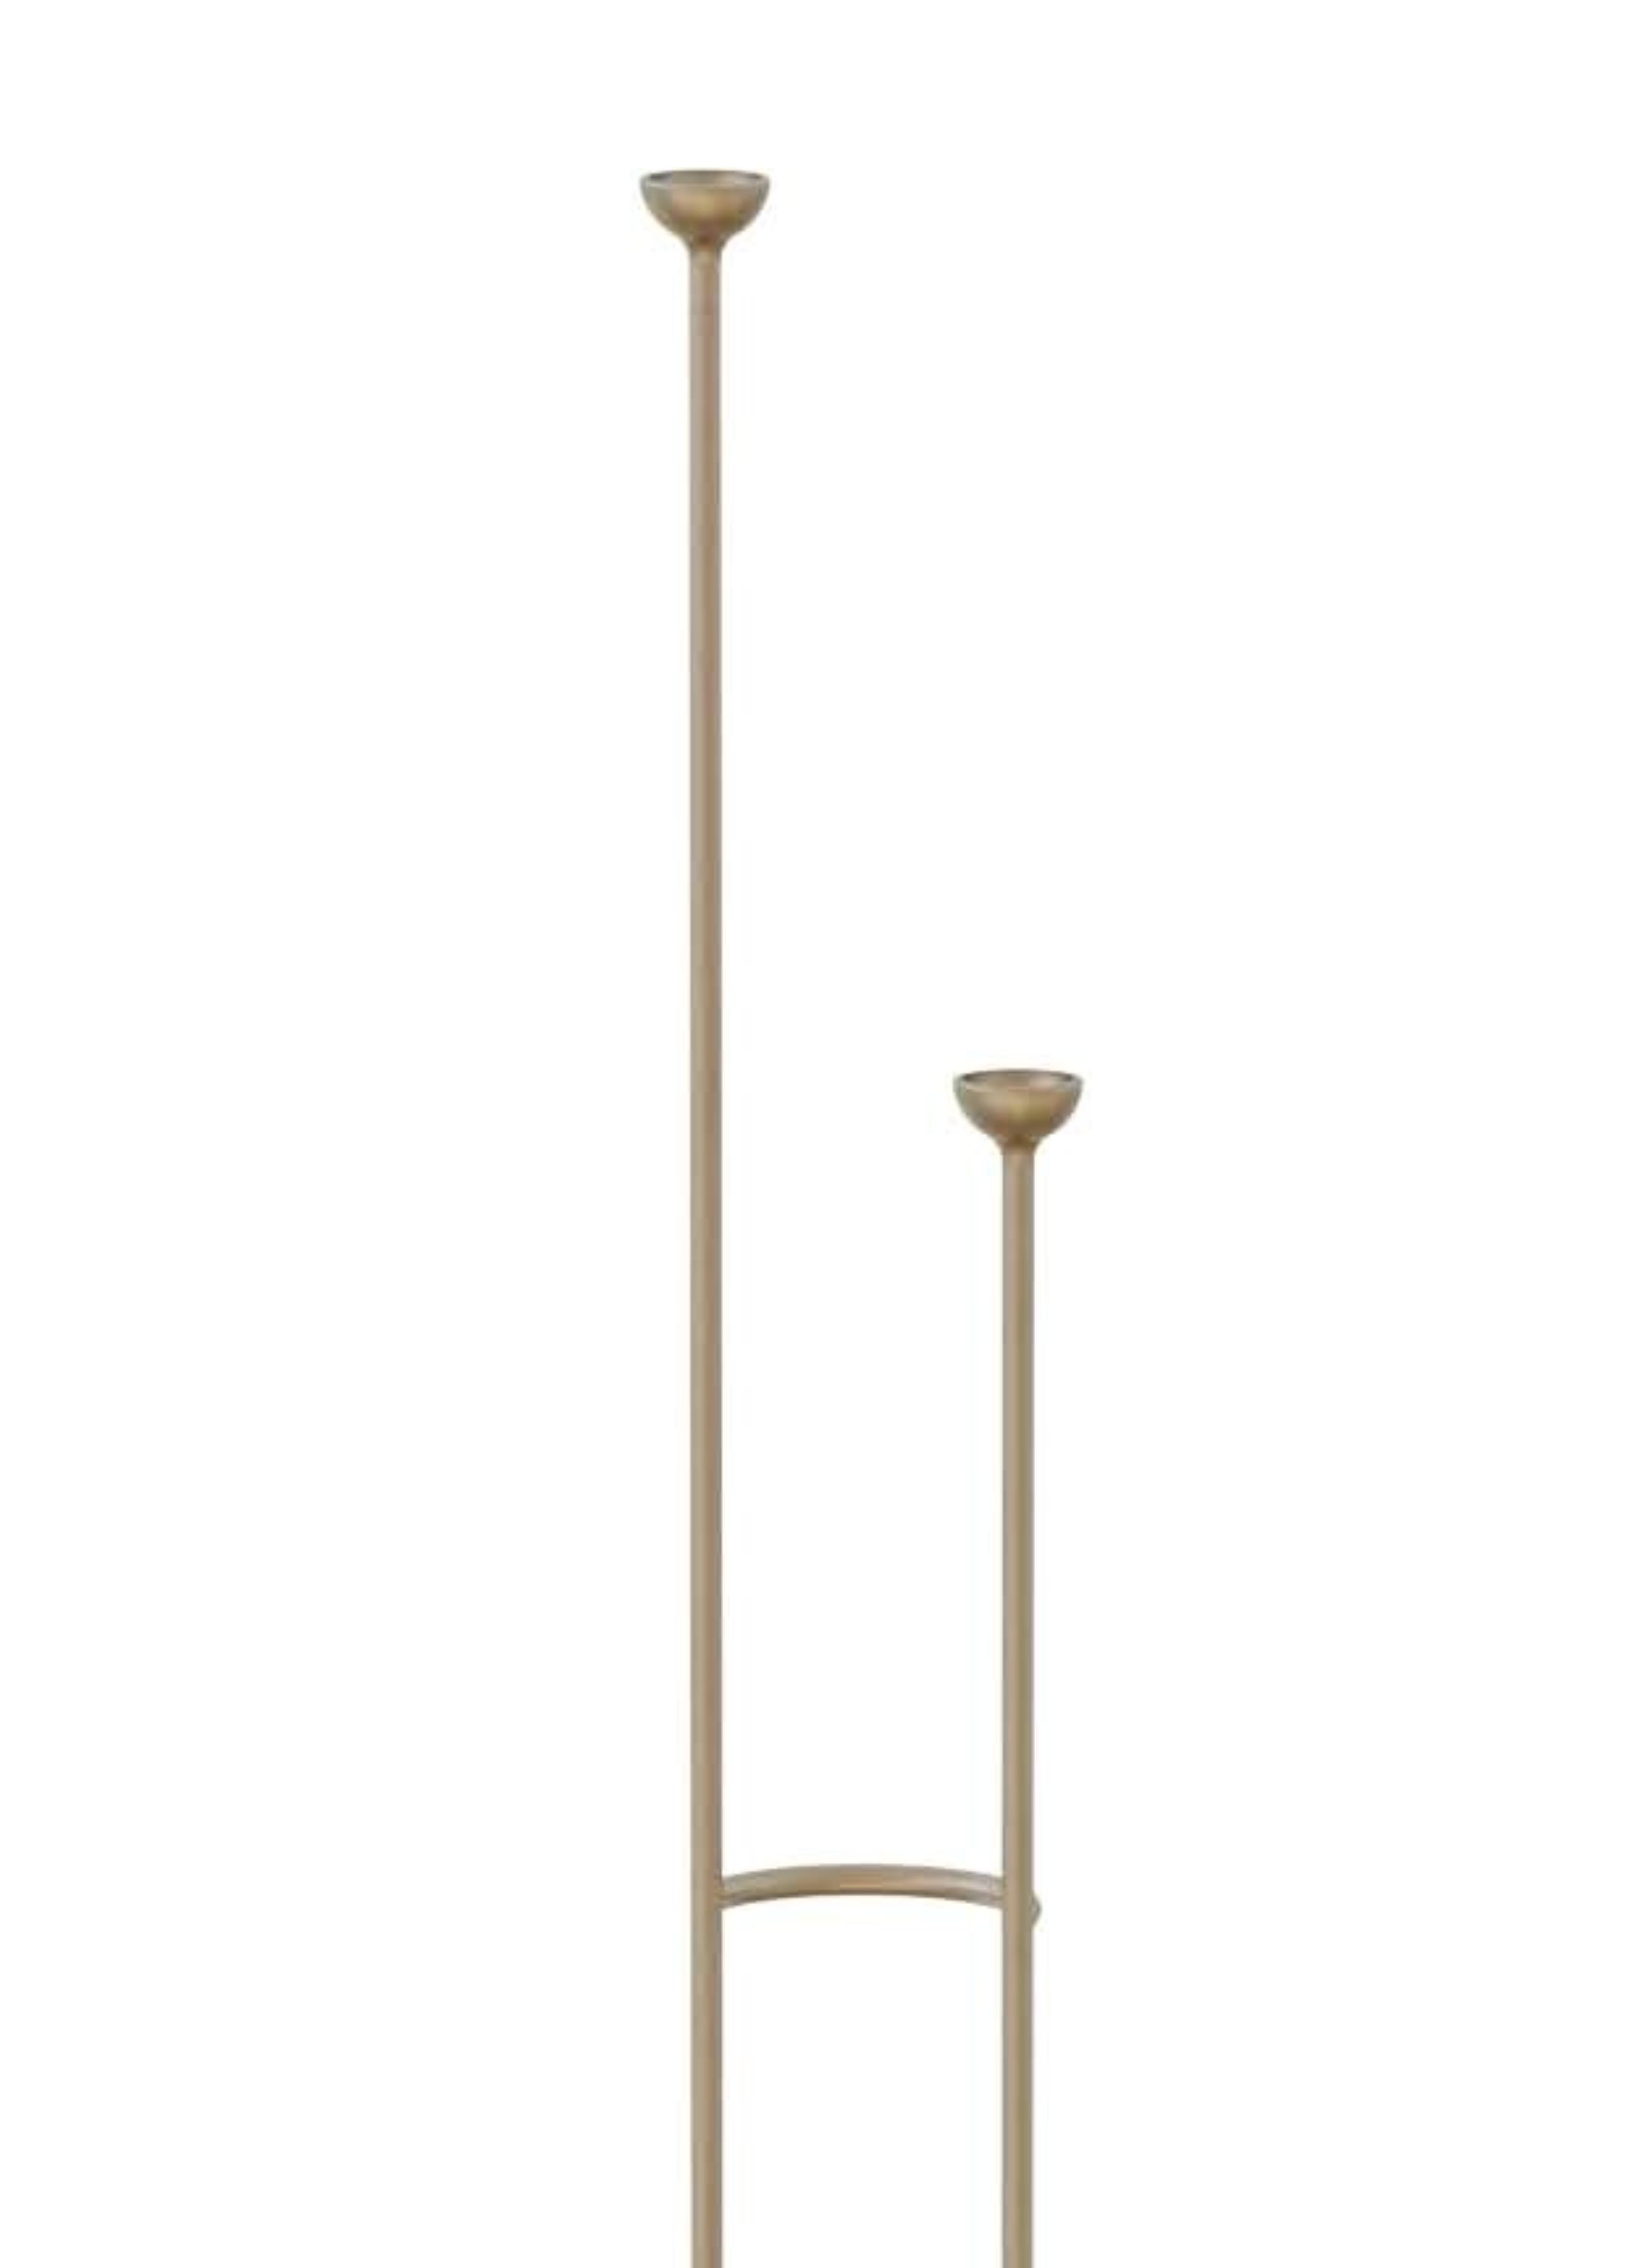 Large camino candle holder by Sebastián Angeles
Material: Brass
Dimensions: W 30 x D 30 x H 169 cm
Also Available: Steel version available.

The transcendence of decisionmaking and its consequences, as turning points in everyday life, are